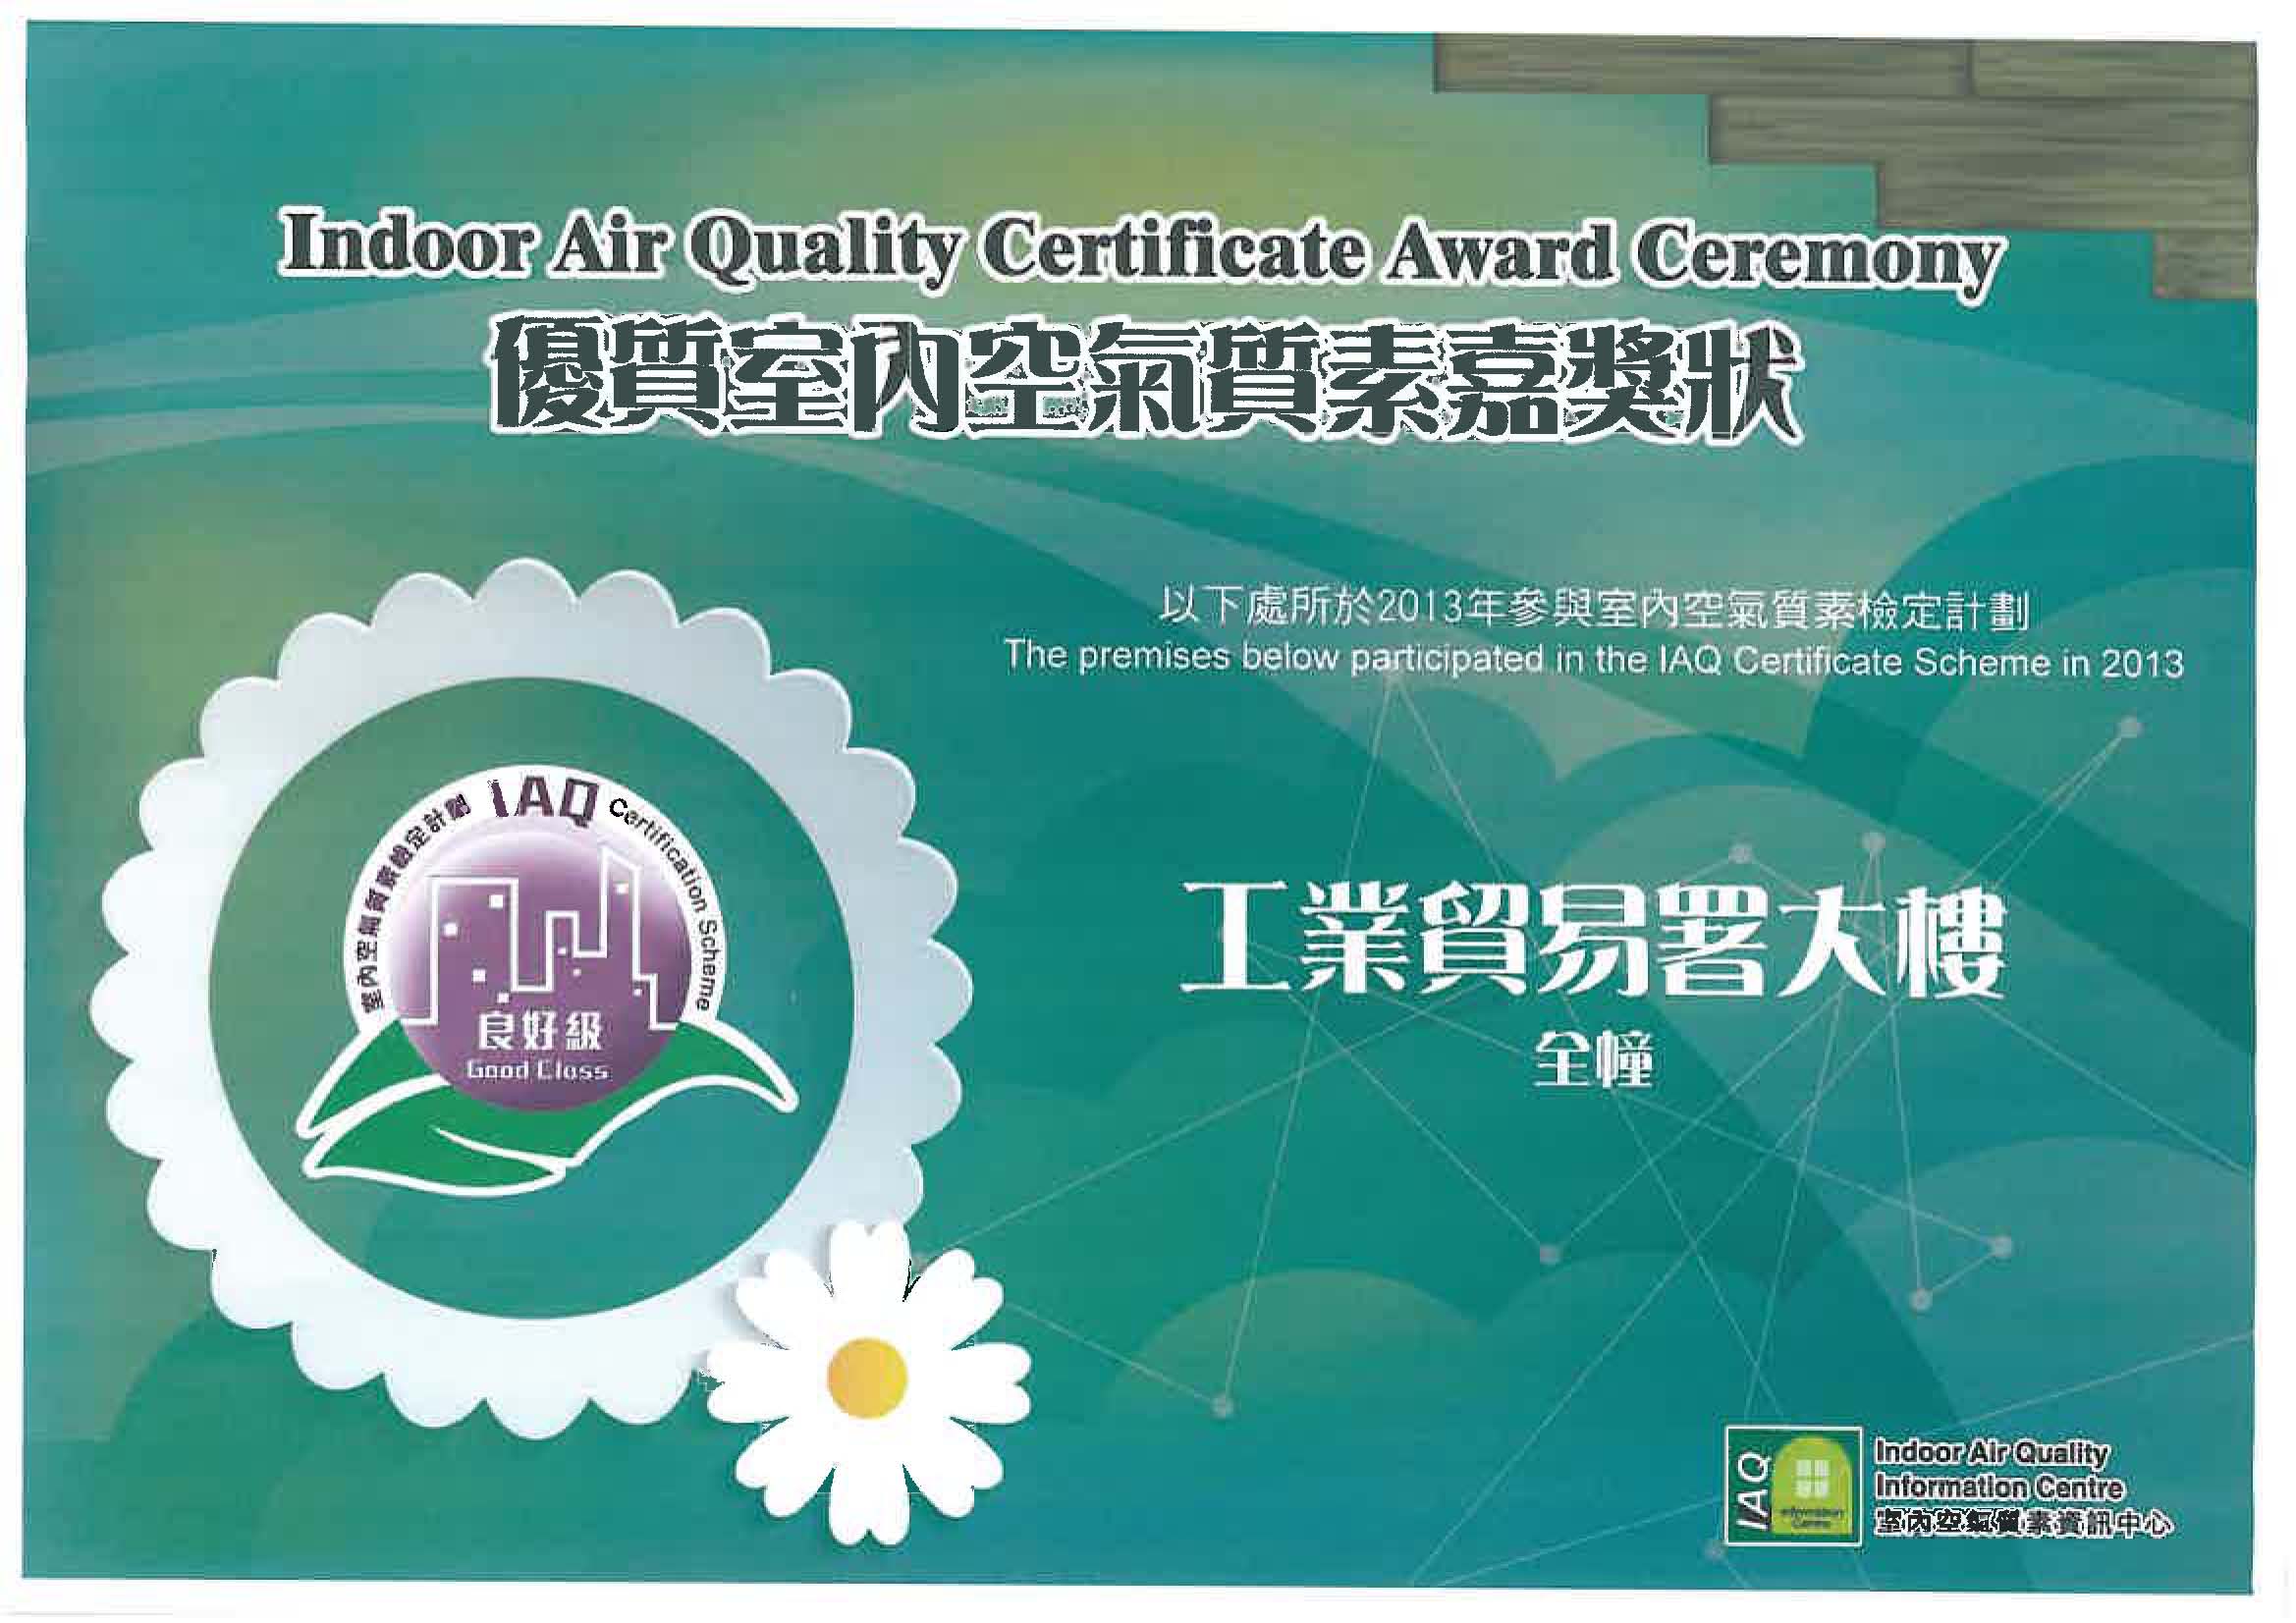 Indoor/Air Quality Certificate Award Ceremony